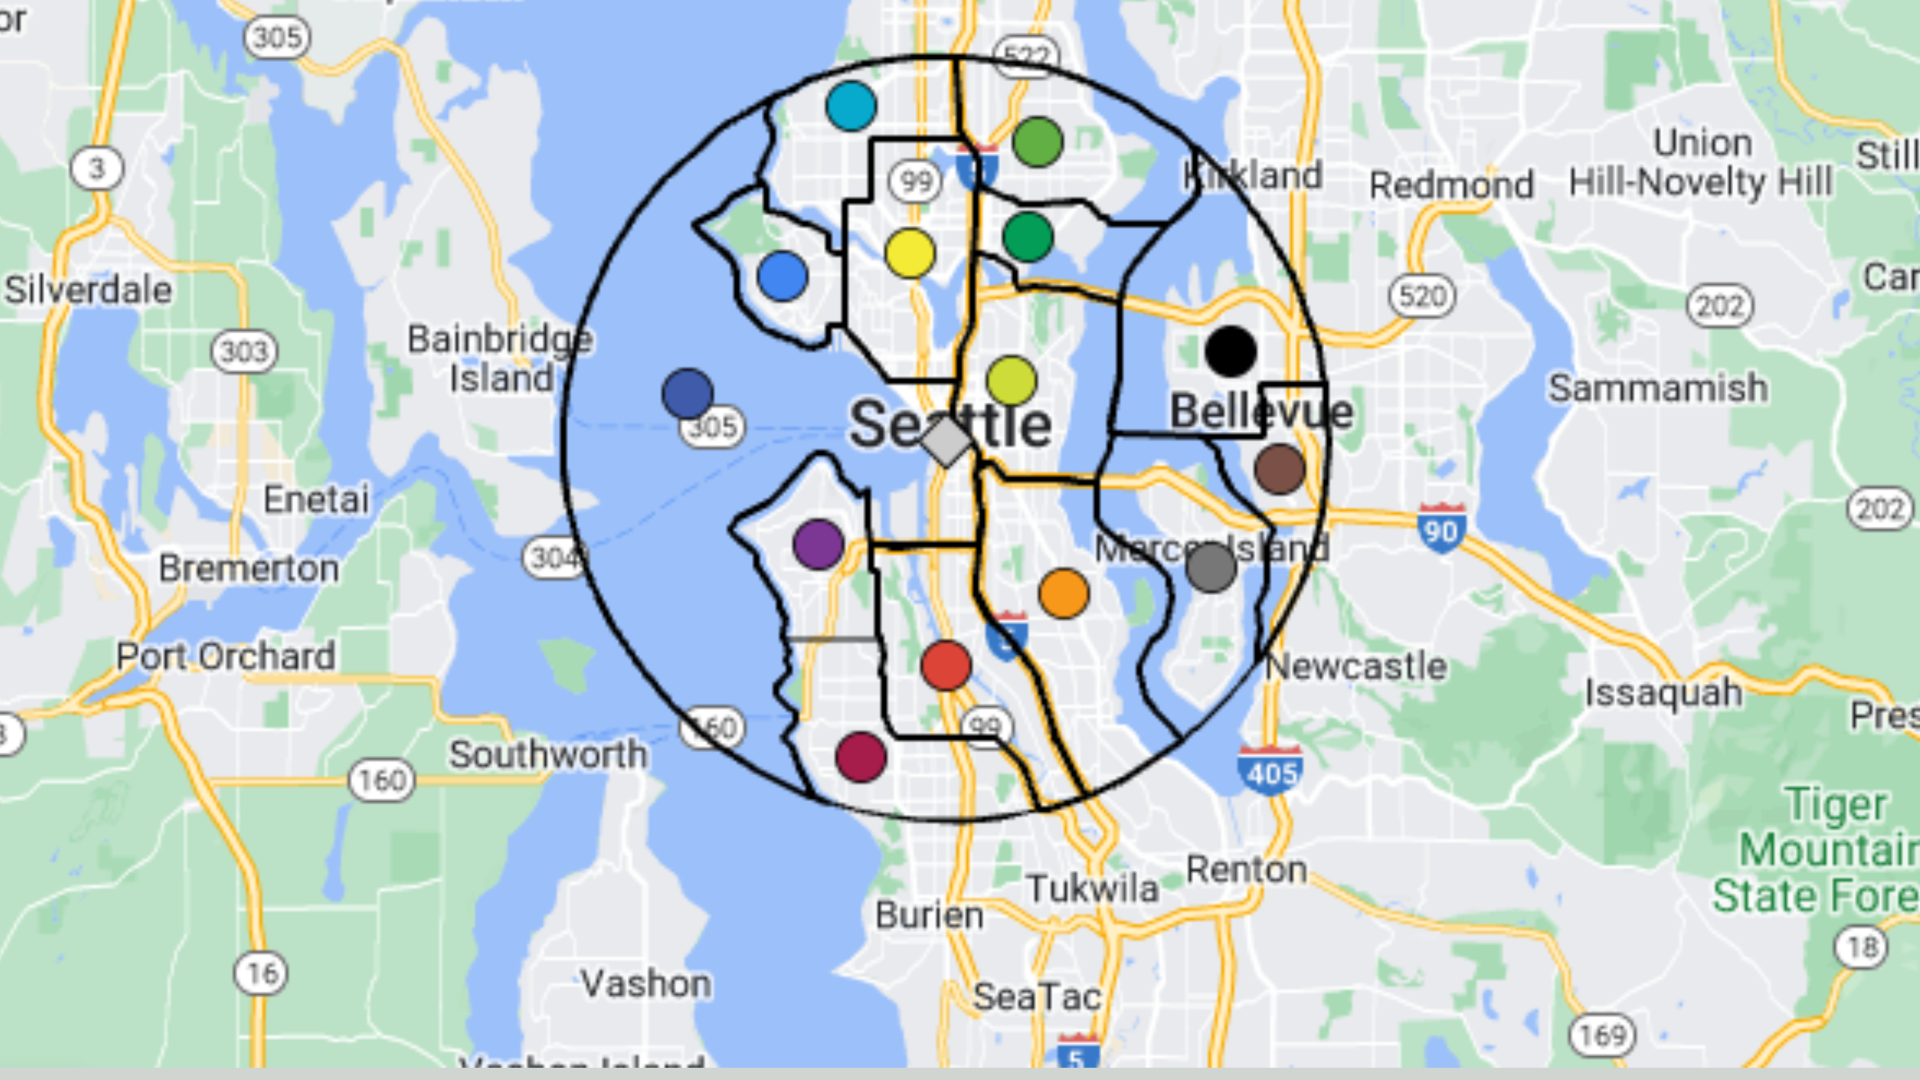 A map of Seattle area with little circles indicating areas for participating in bird counting.